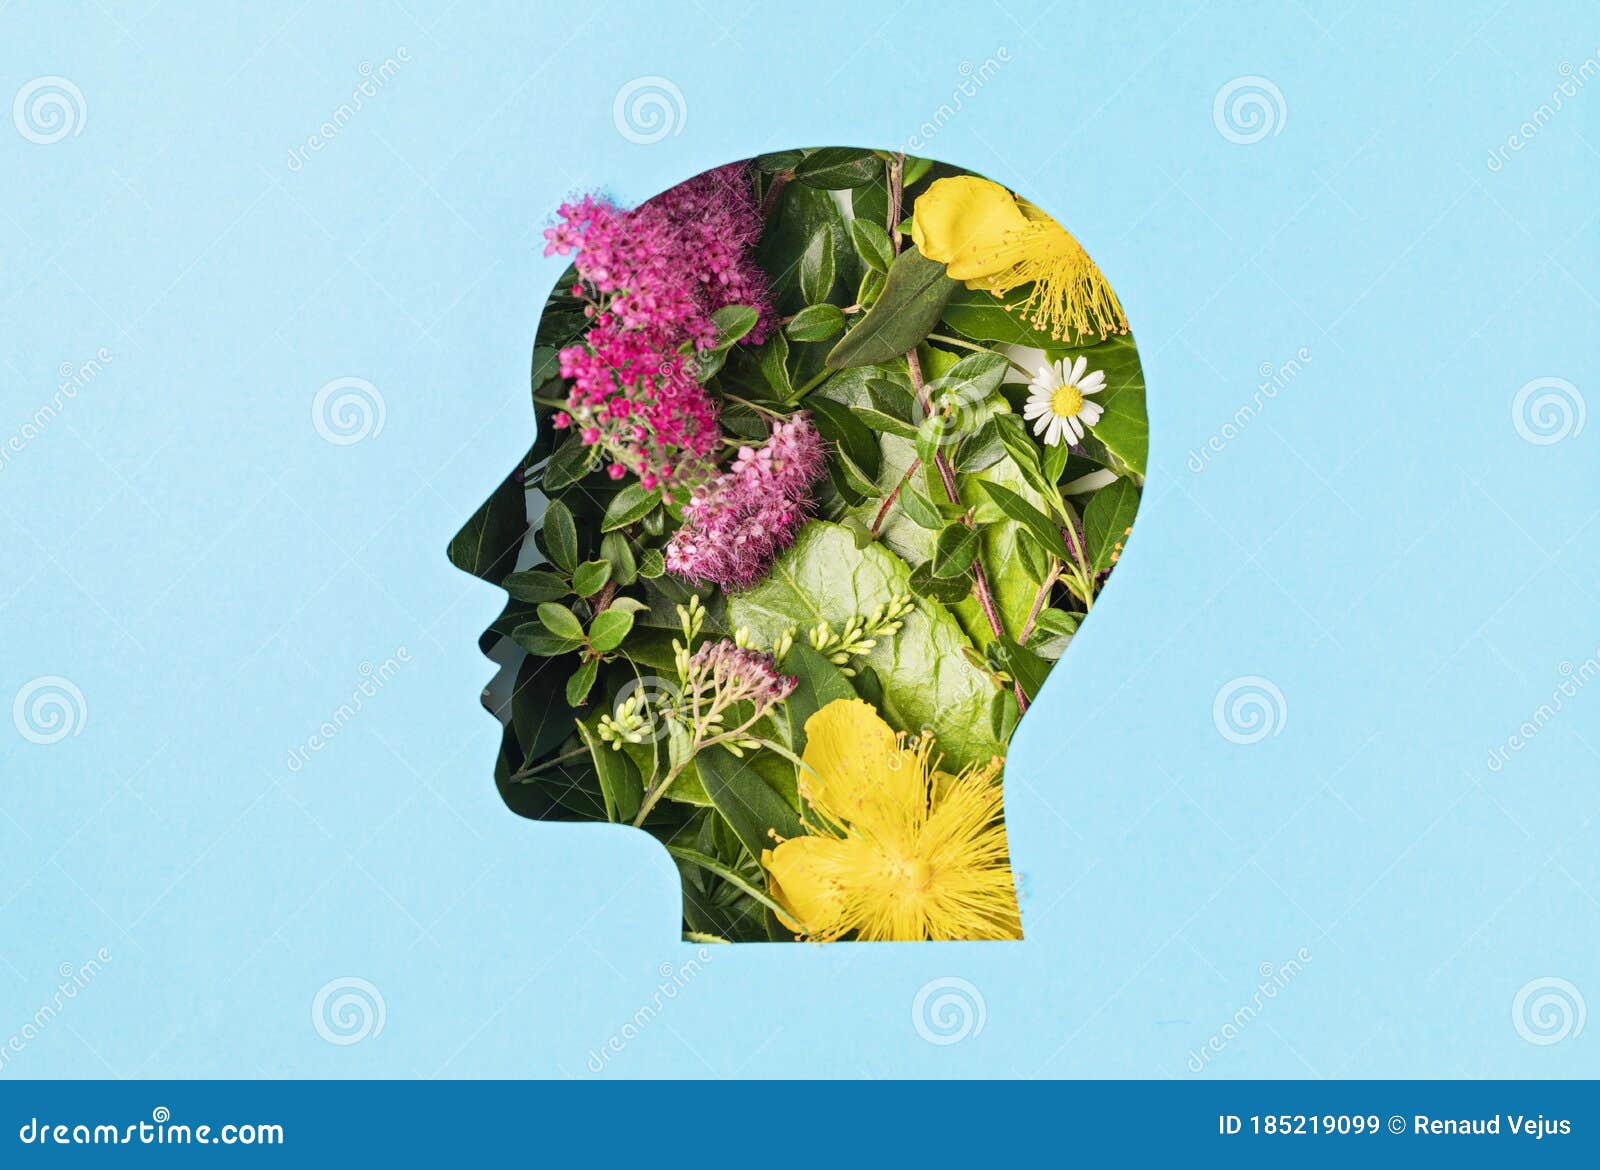 papercut head with green leaves and flowers. mental health, emotional wellness, contented emotions, self care, psychology, green